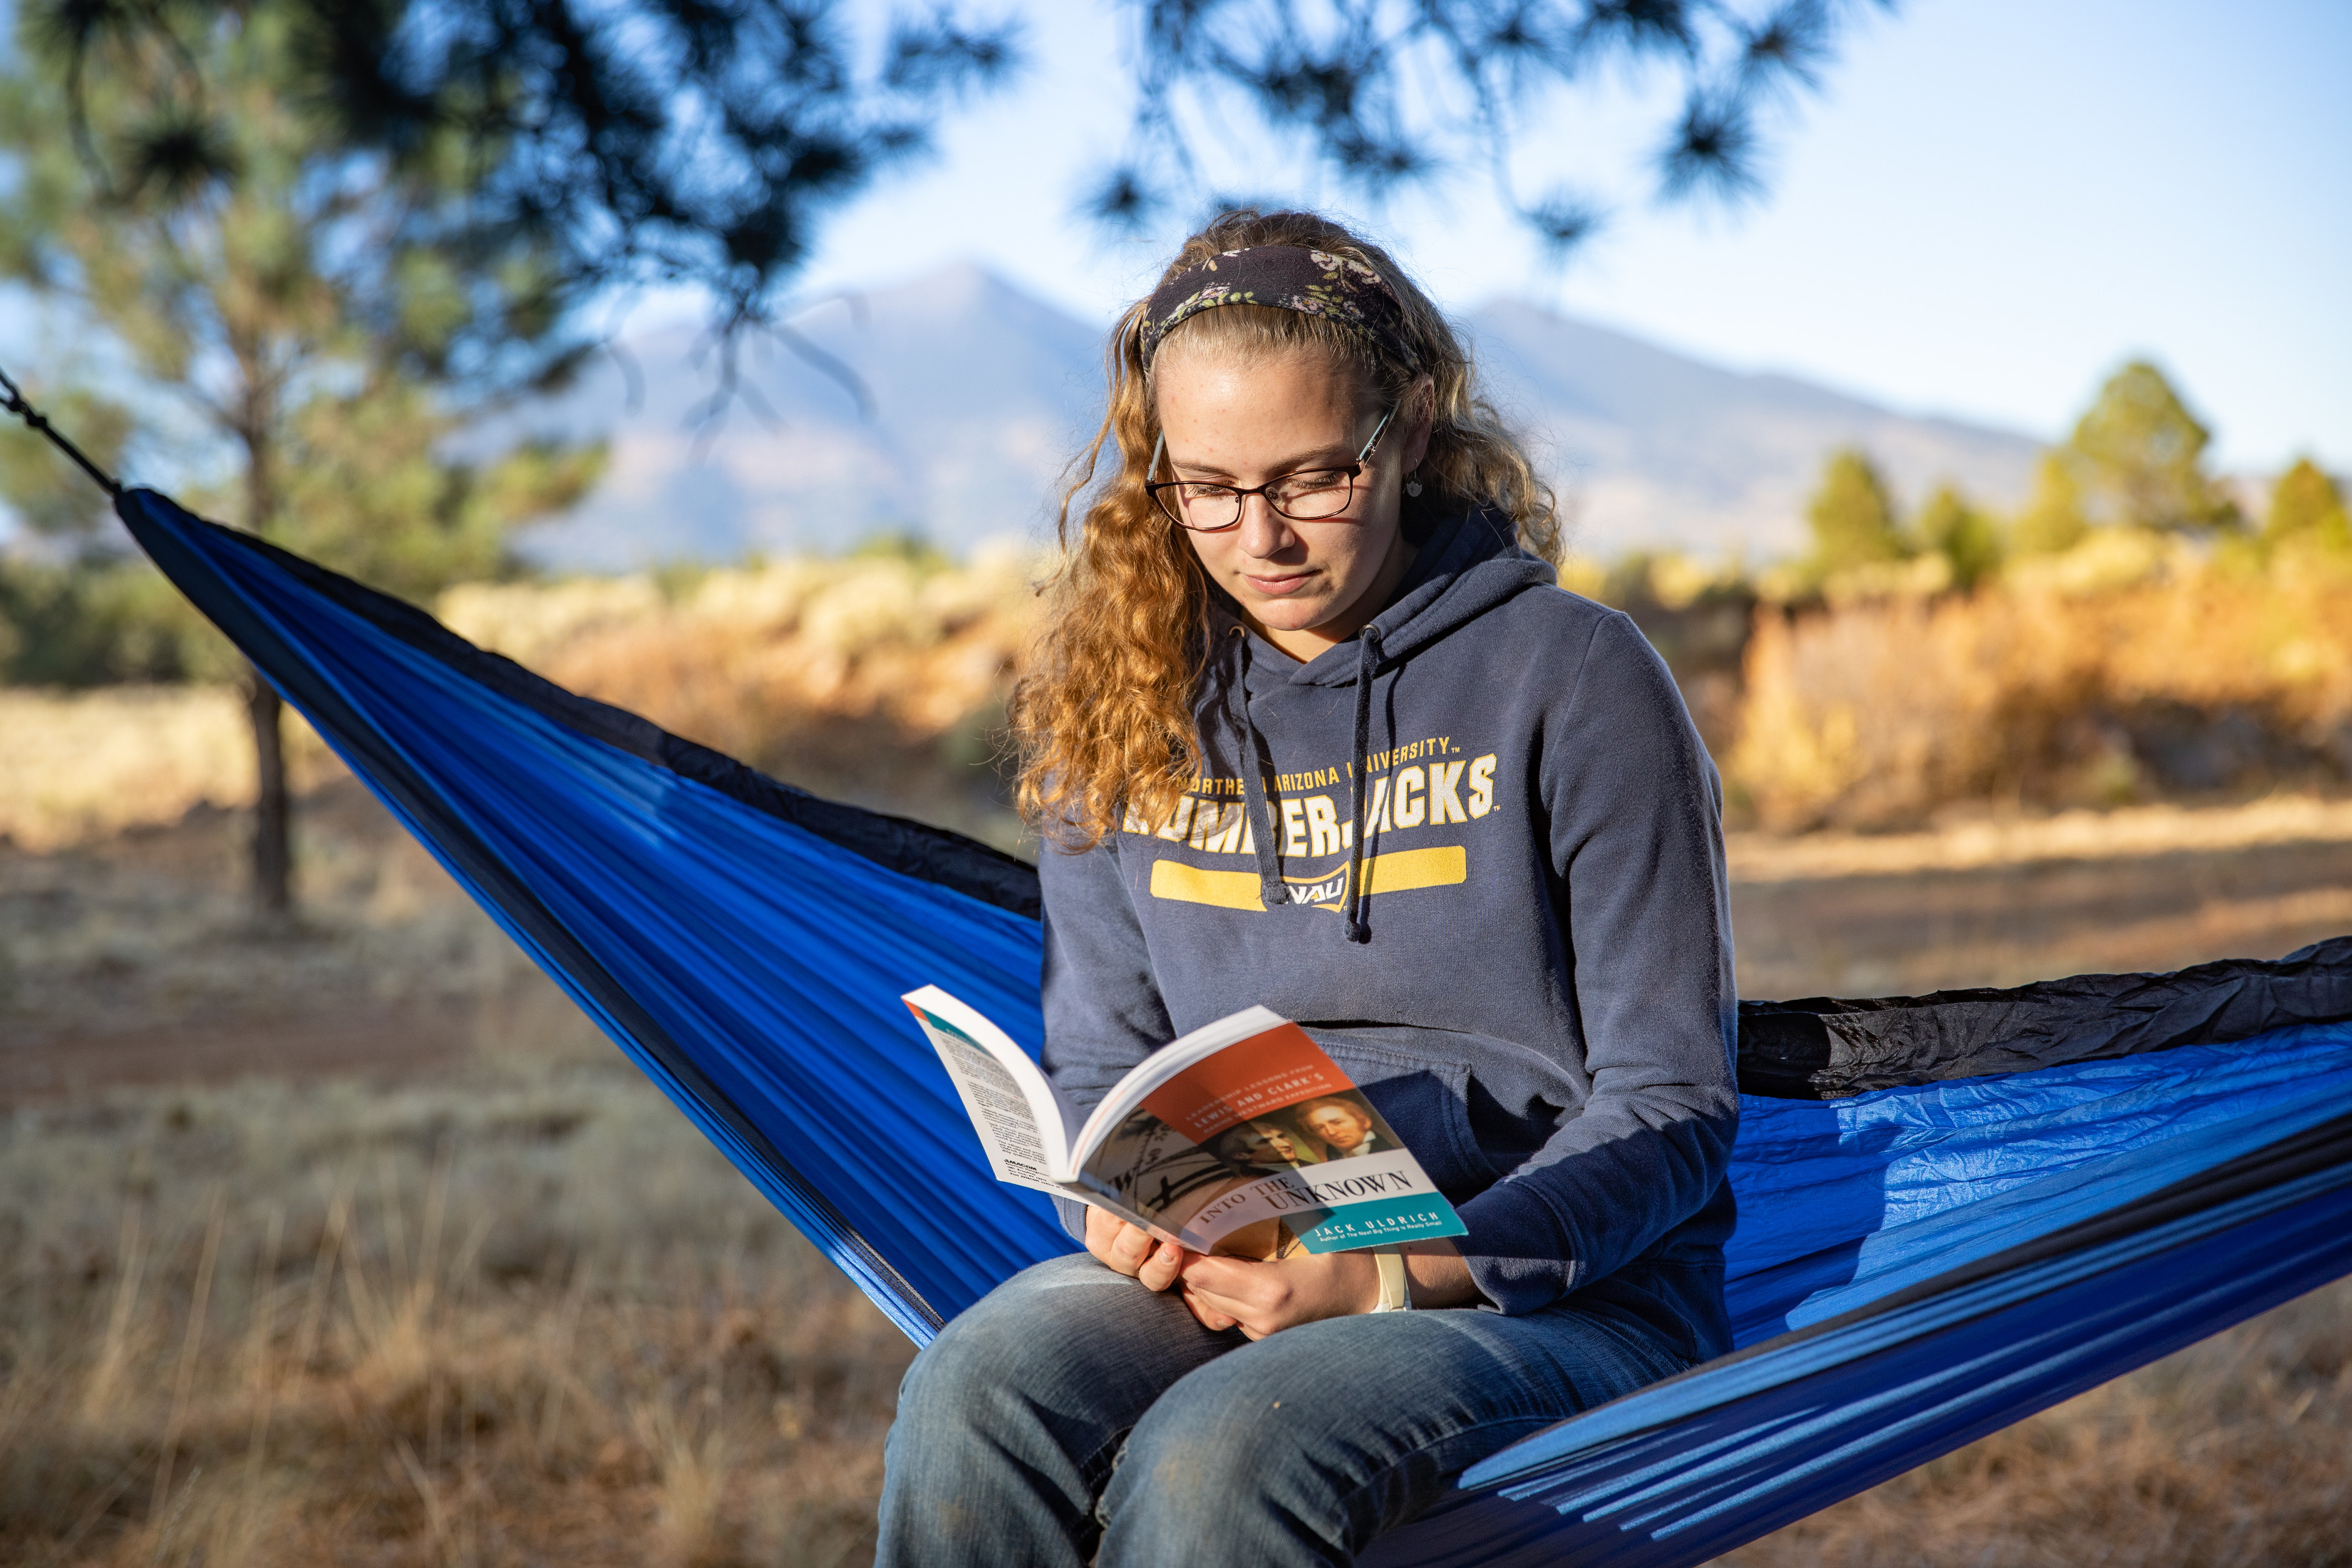 A student reading a book on a hammock outside.